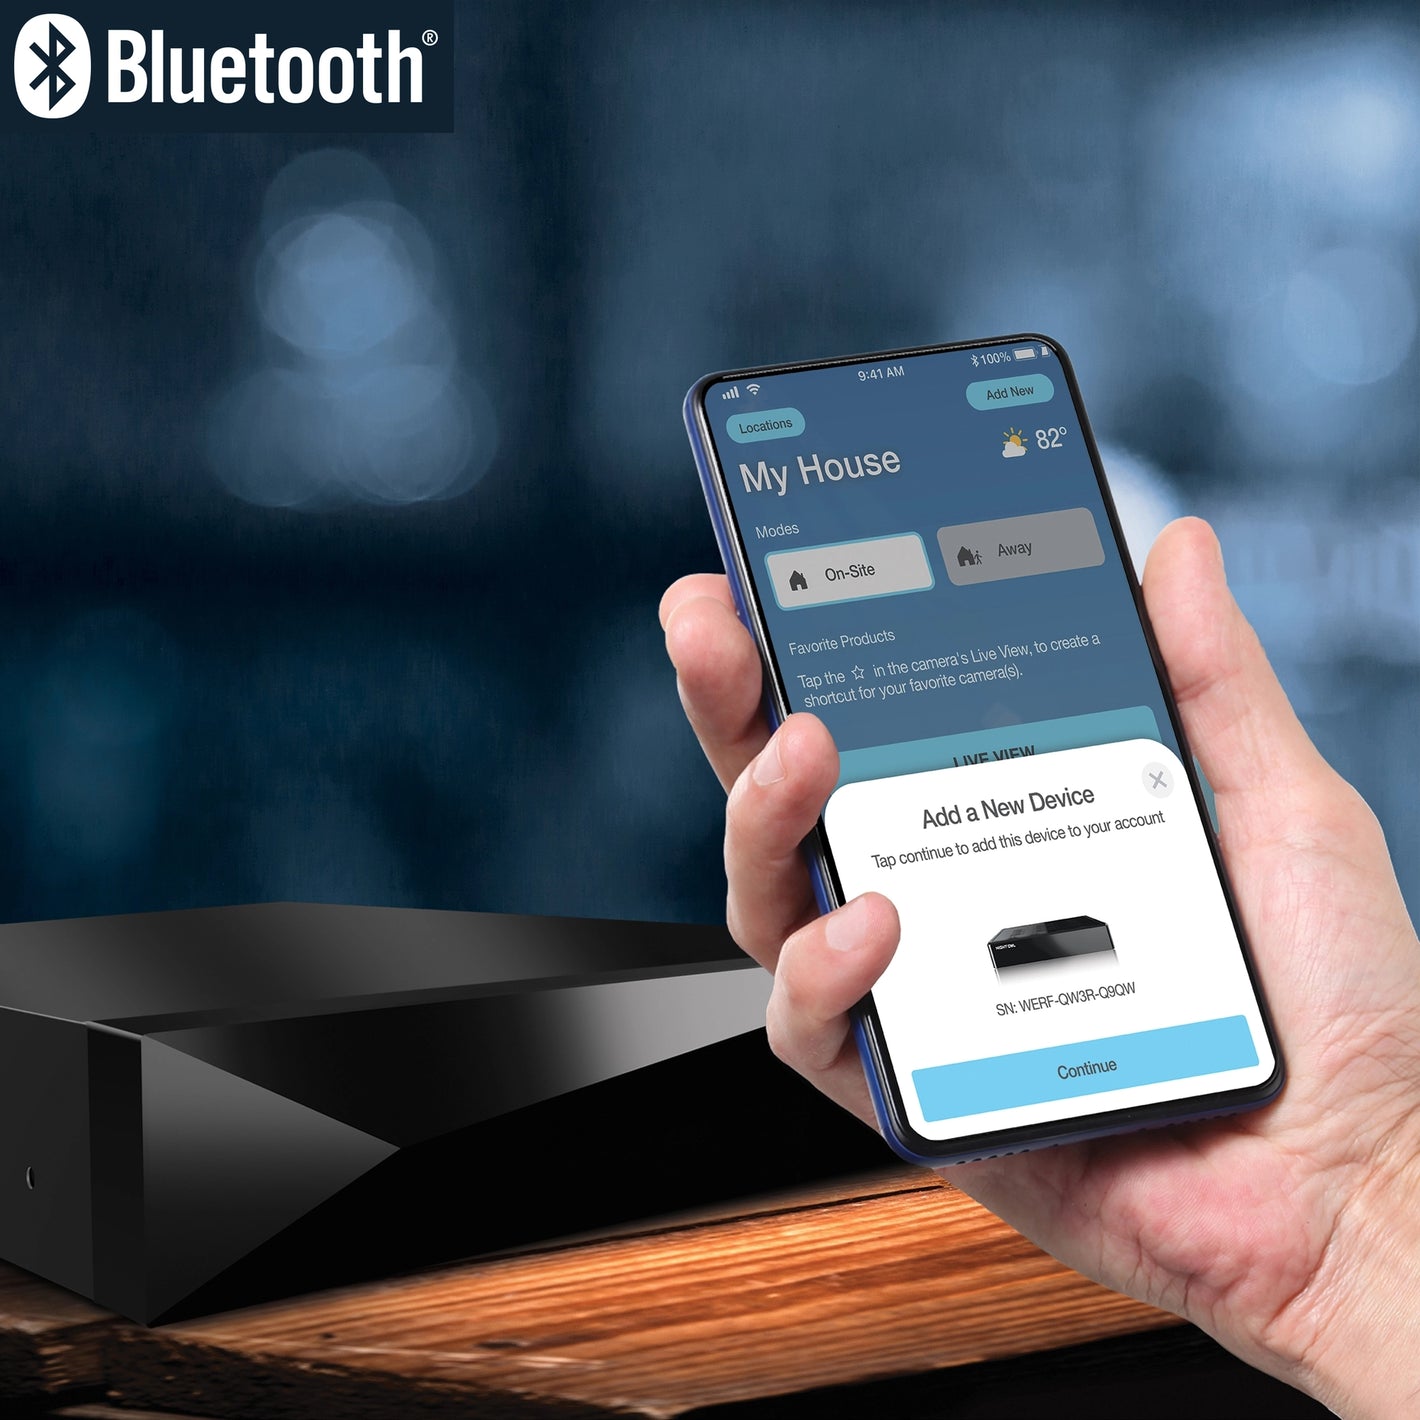 NVR app showing bluetooth capability